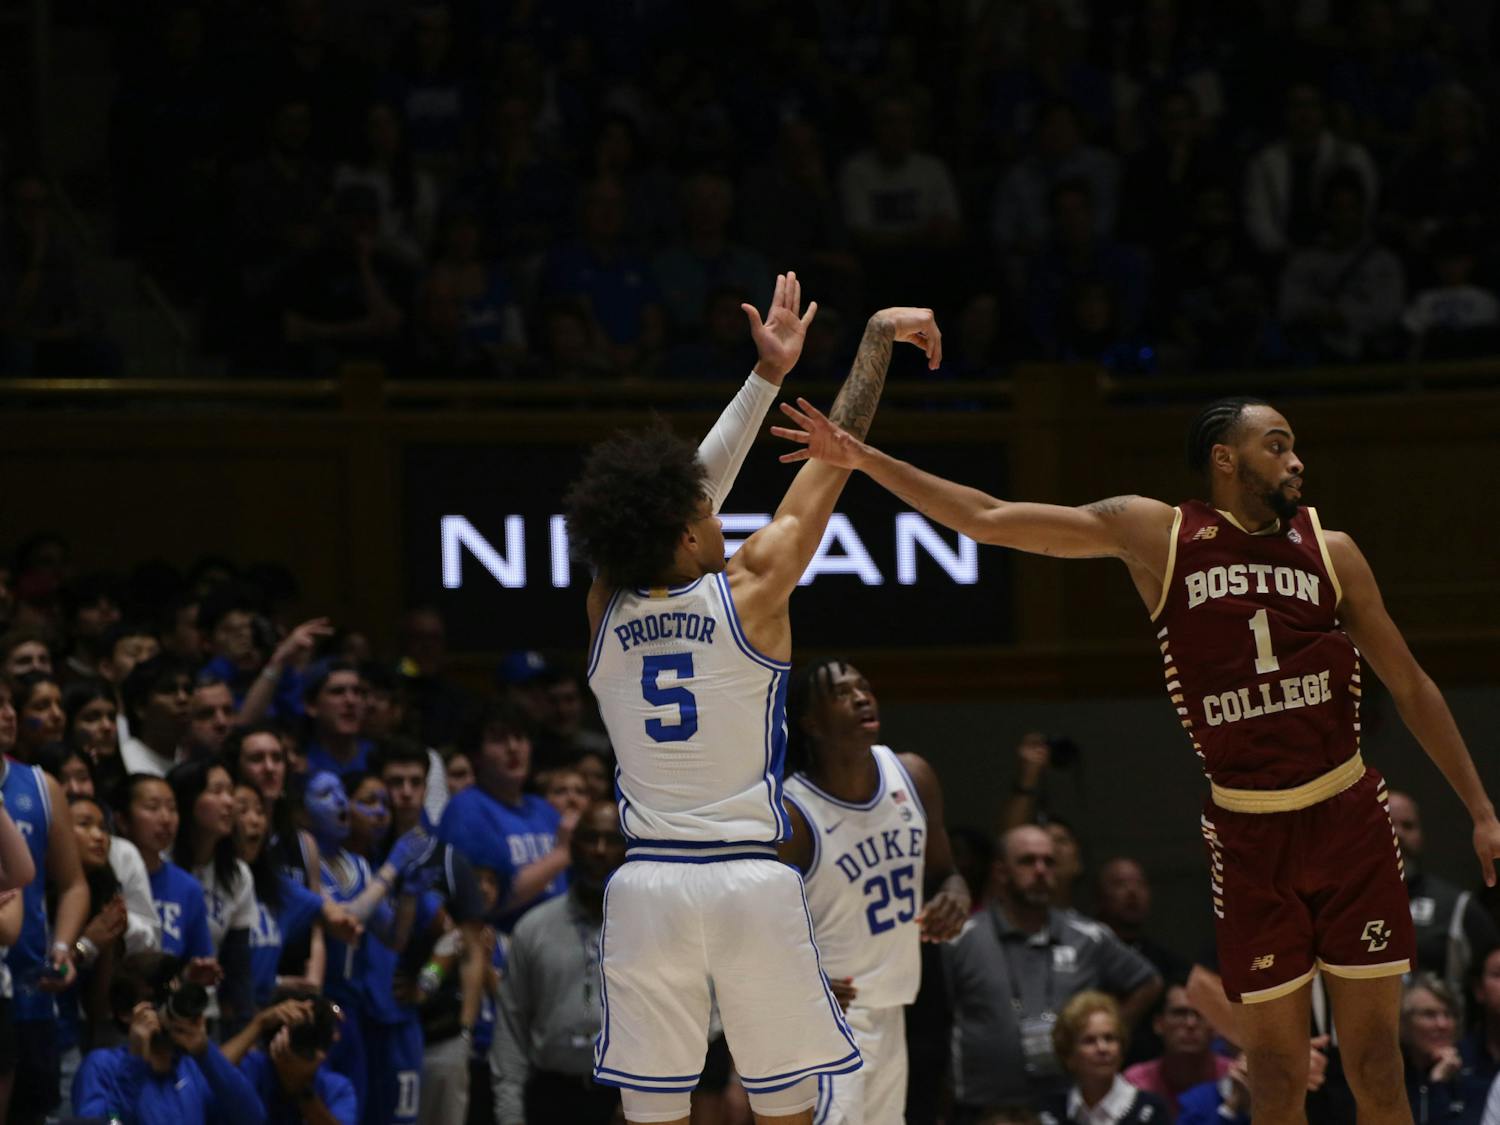 Sophomore point guard Tyrese Proctor takes a shot in Duke's game against Boston College.